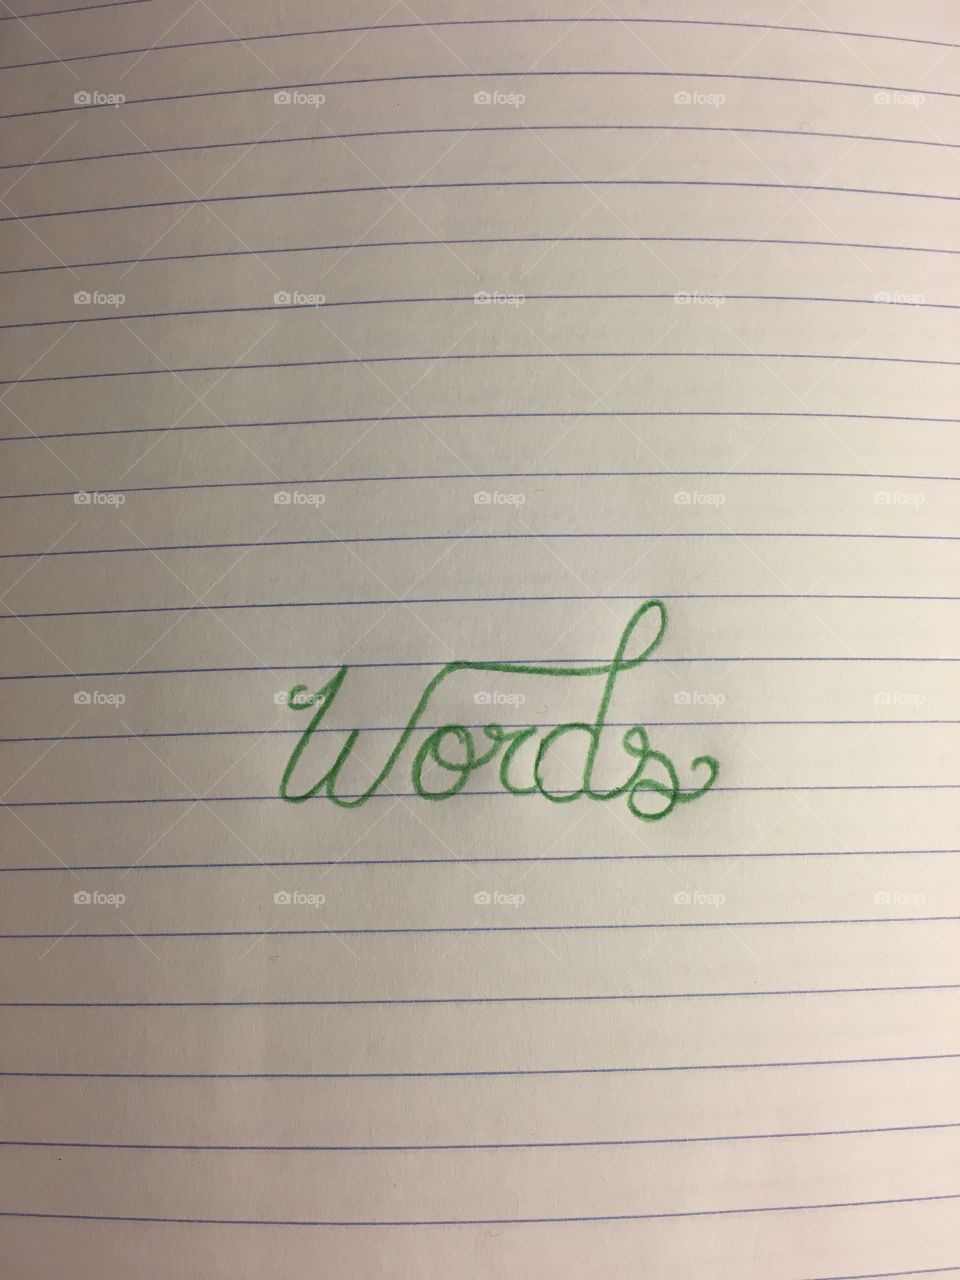 Words on a page